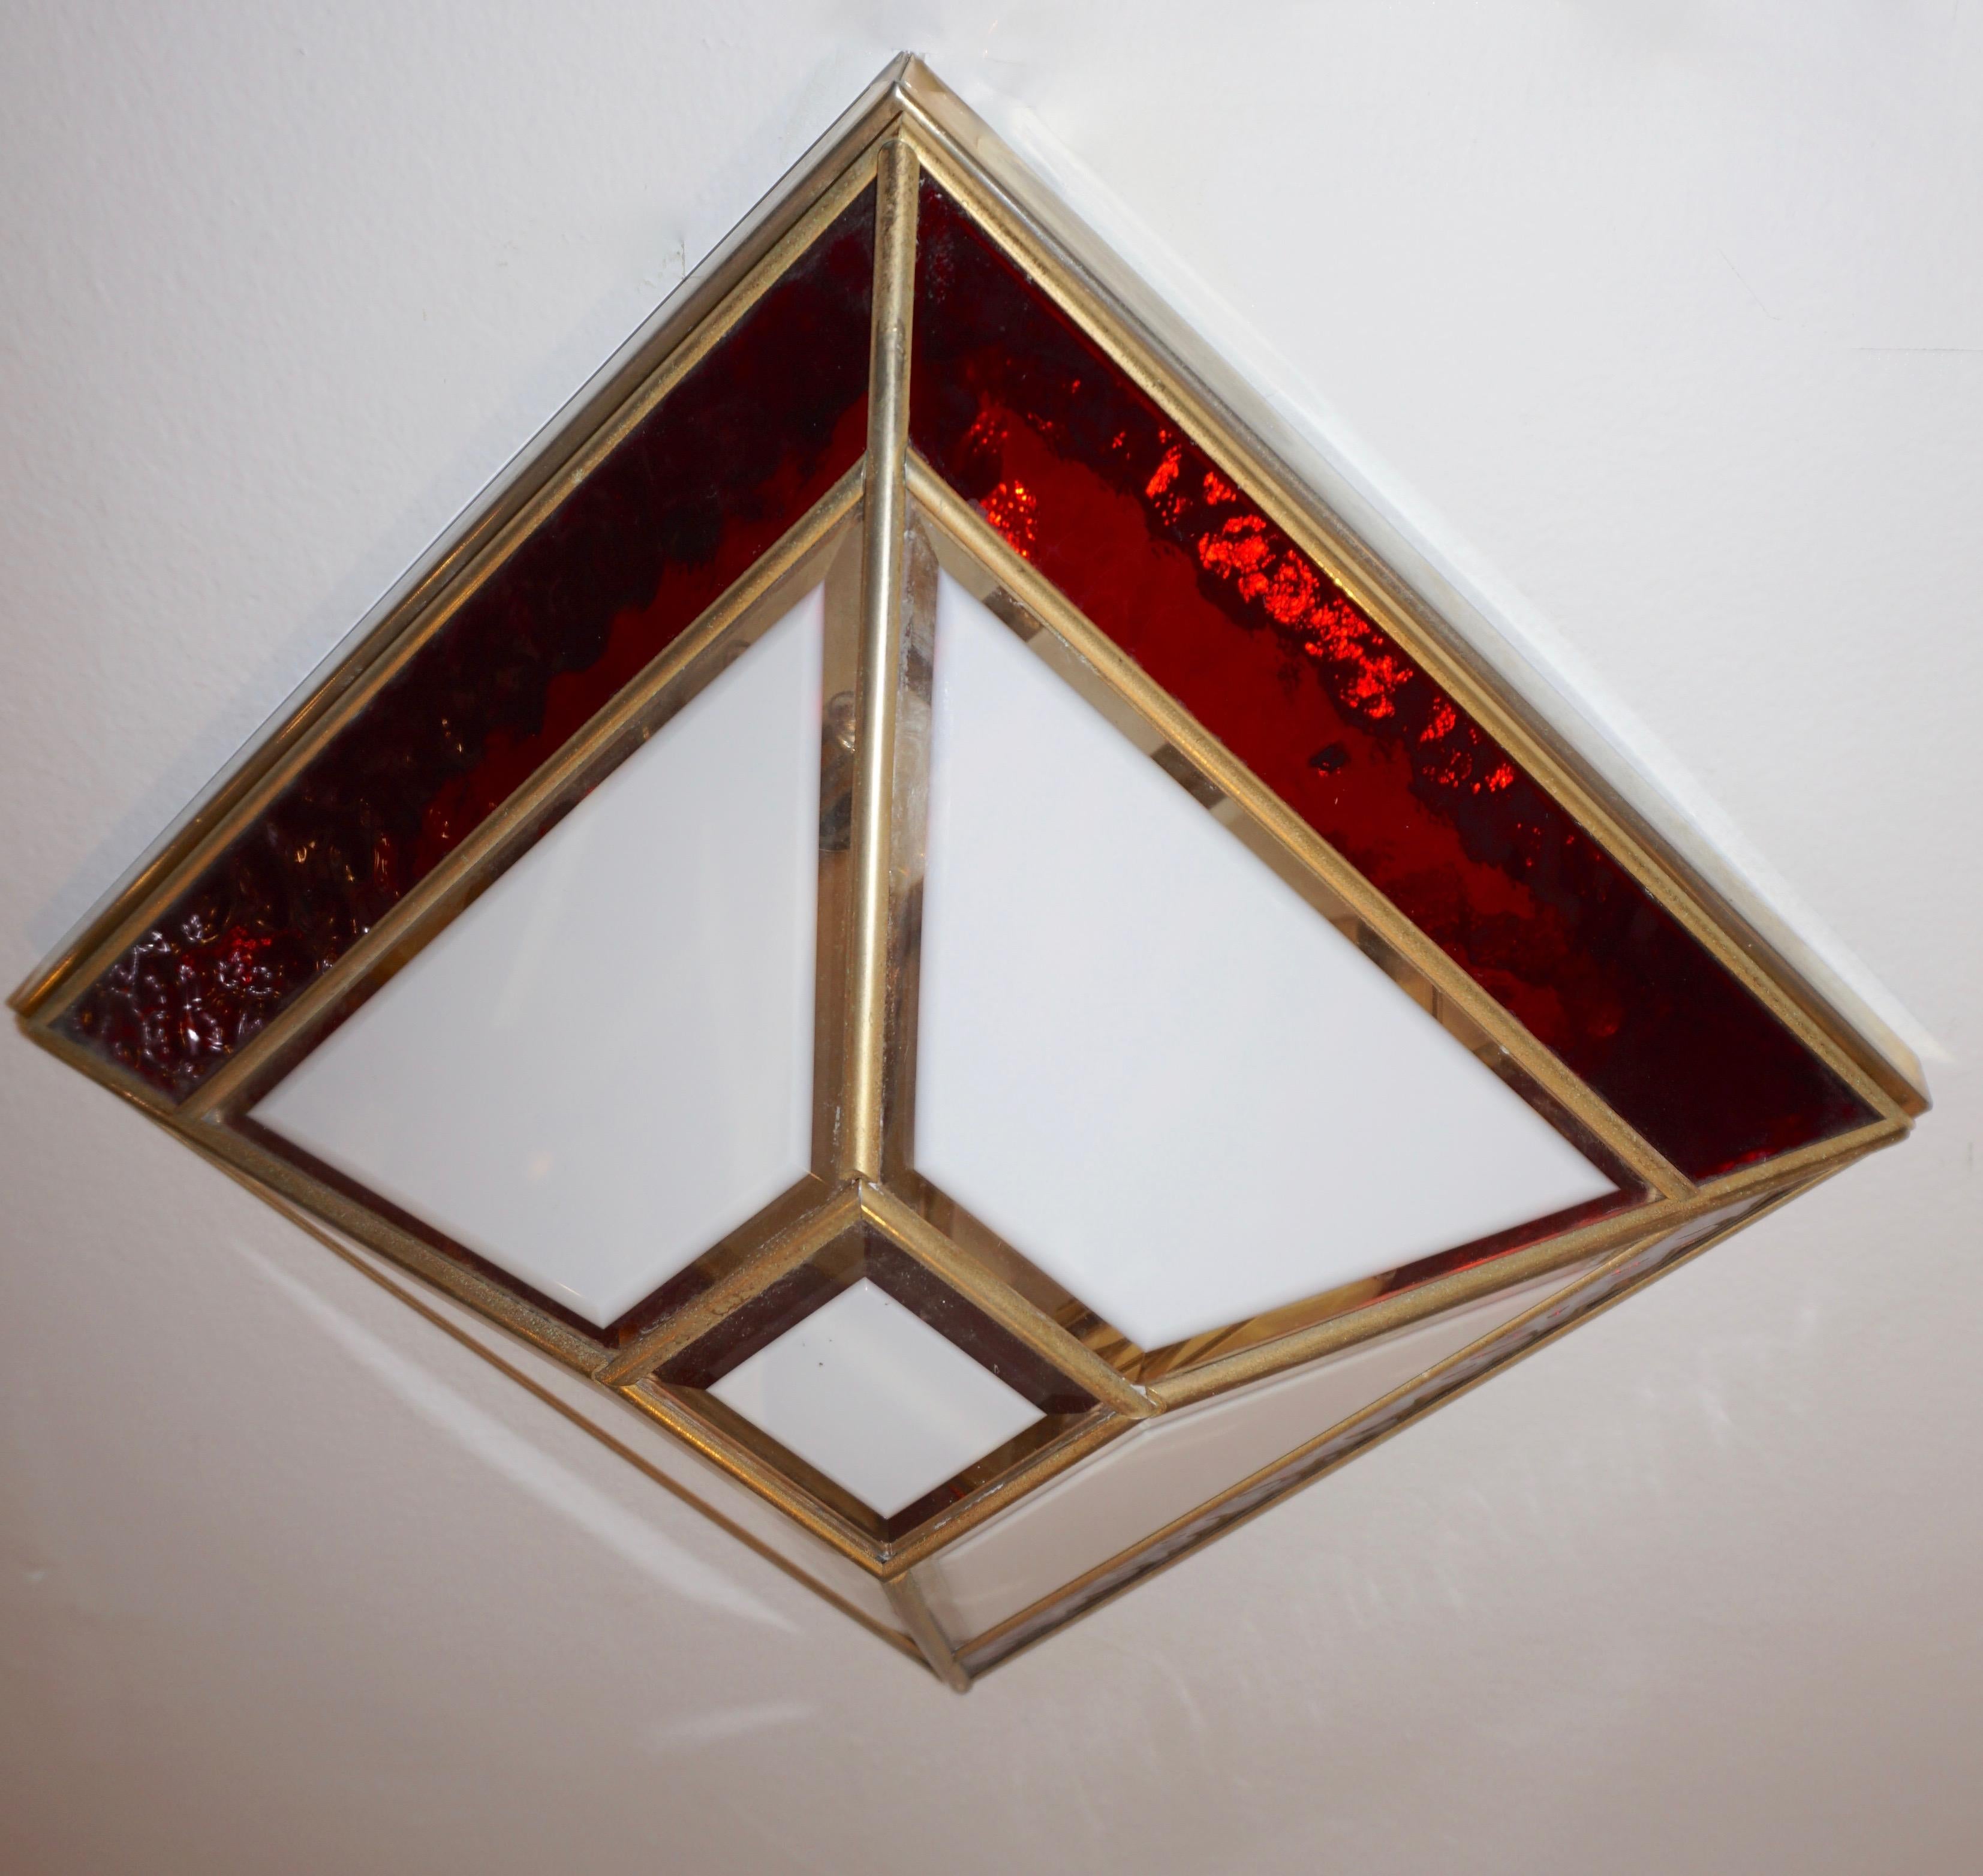 Italian 1950s pair of geometric modern design wall lights of Art Deco style, entirely handcrafted, high quality of details: the pyramid shaped brass structure encloses a red border in textured glass and a dome with 5 white satin frosted glass panels